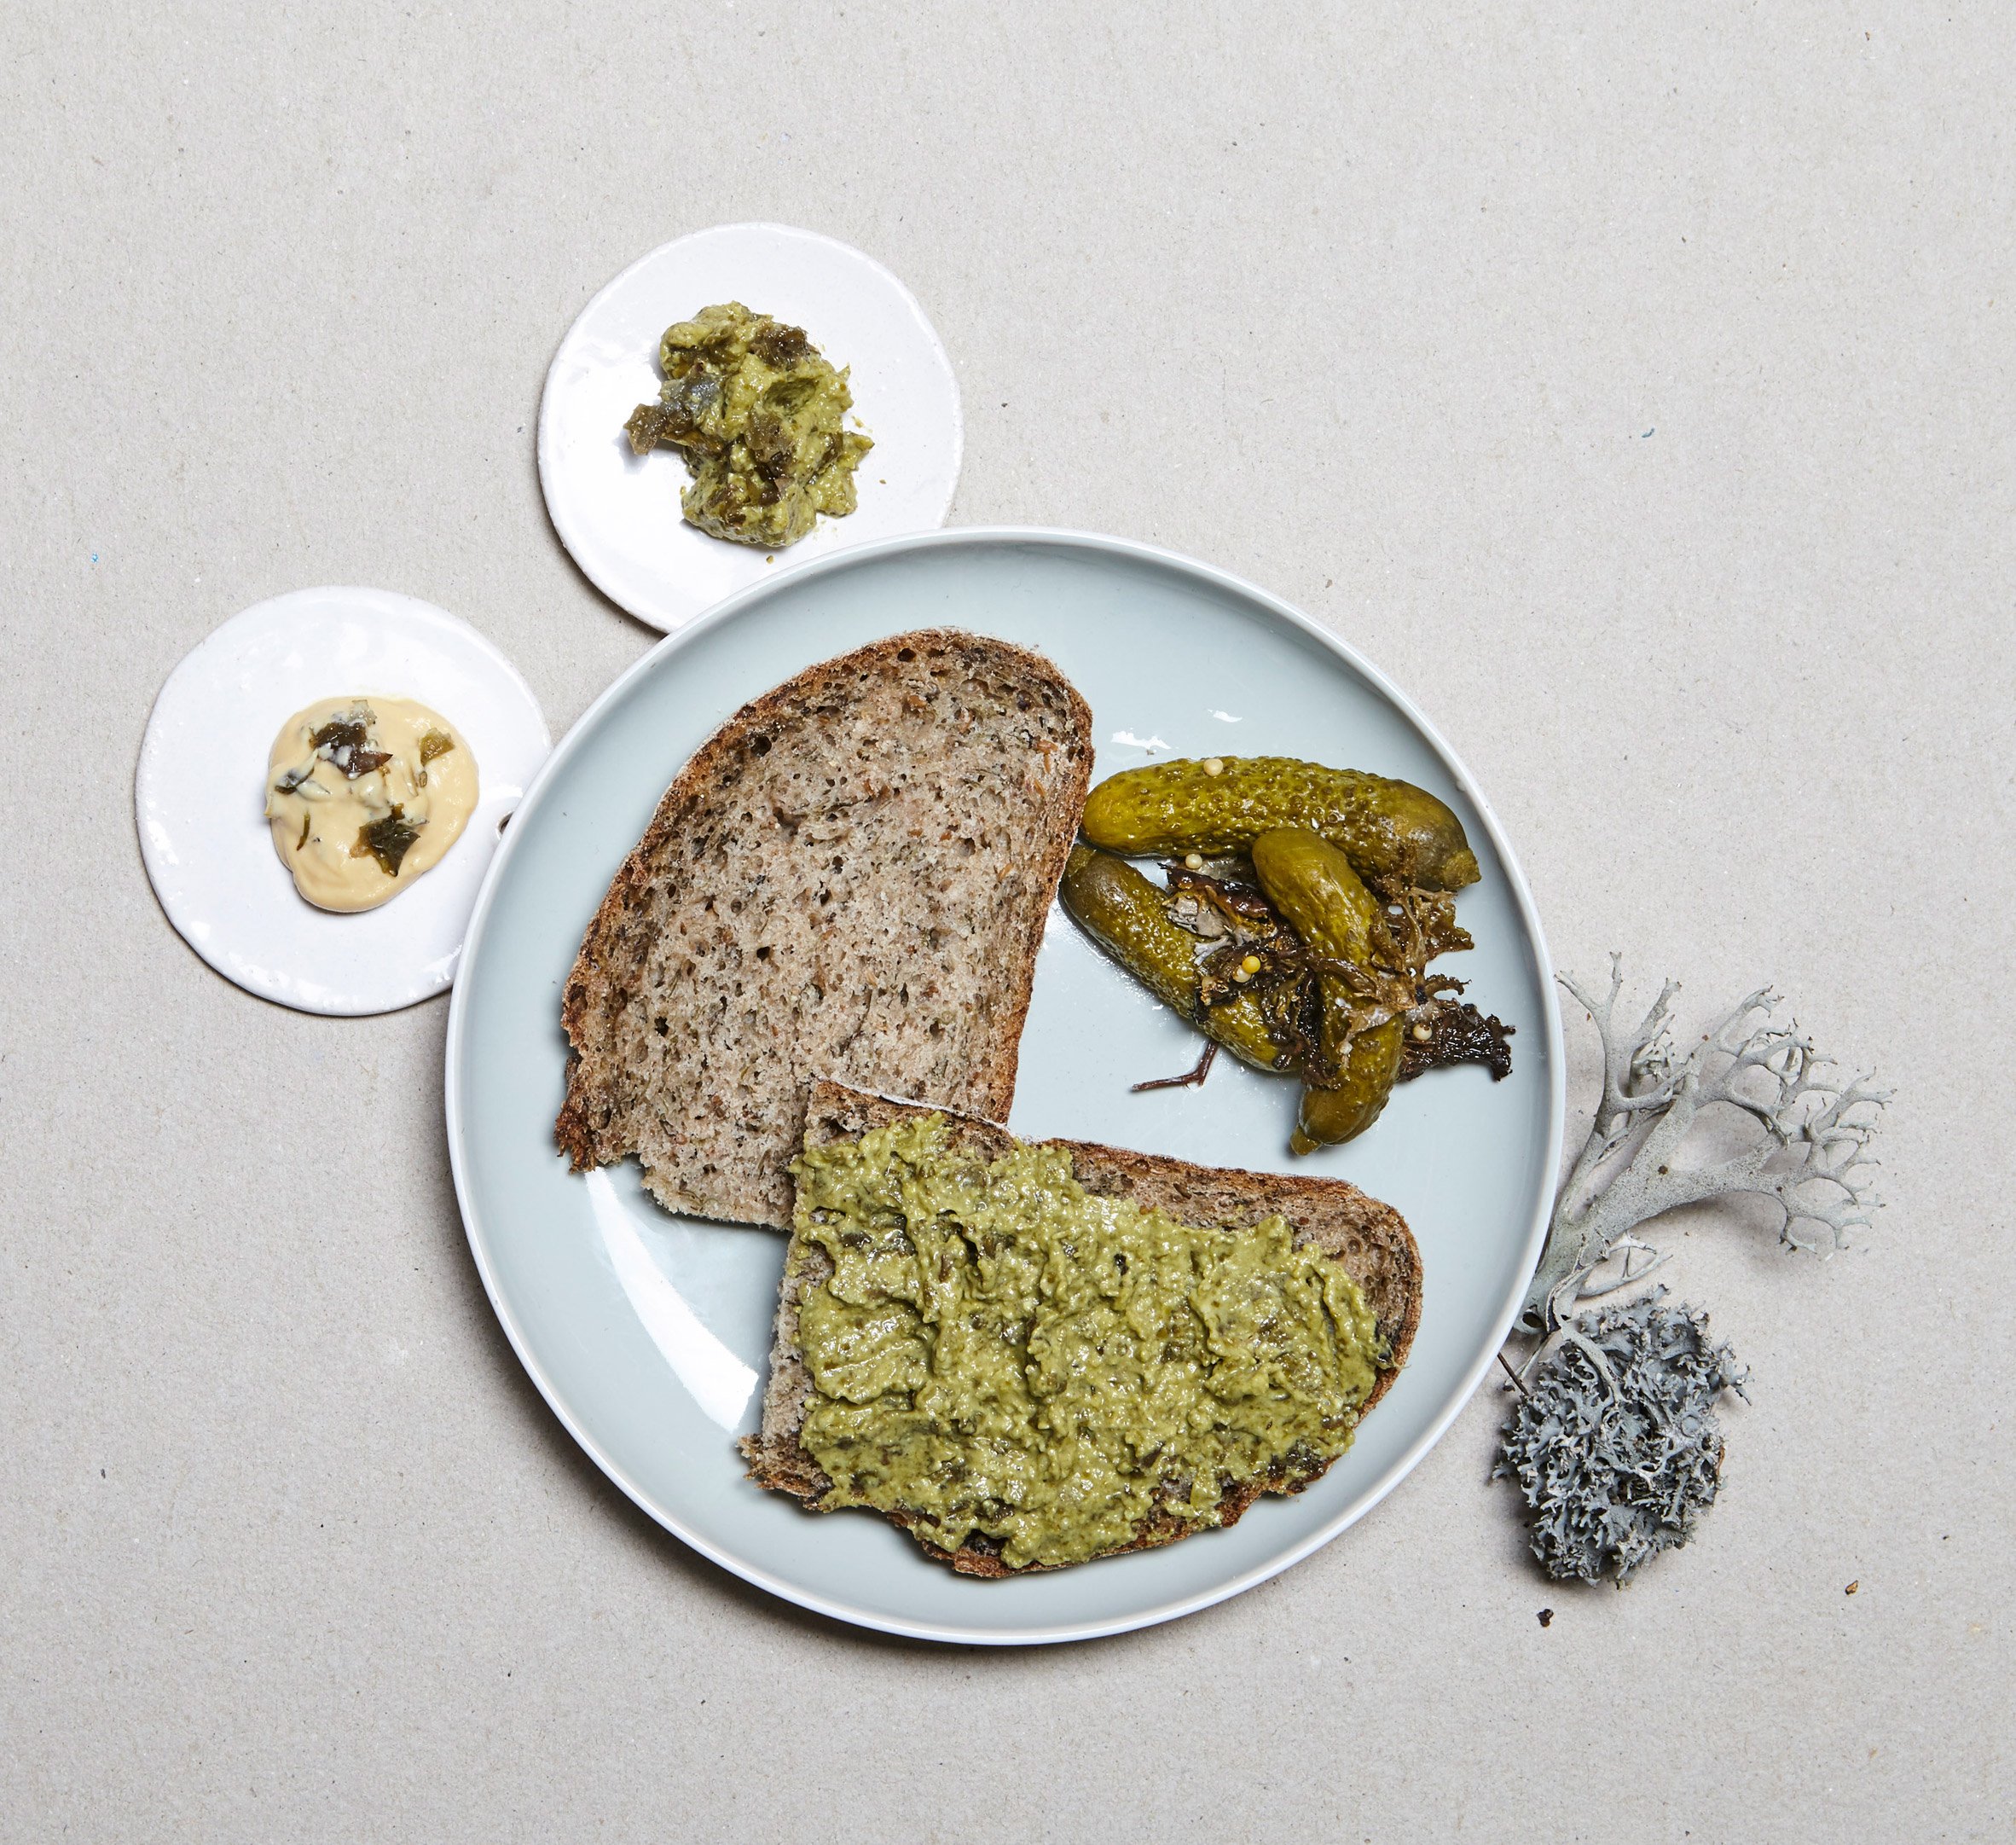 Julia Schwarz uses lichen to create food for after the apocalypse